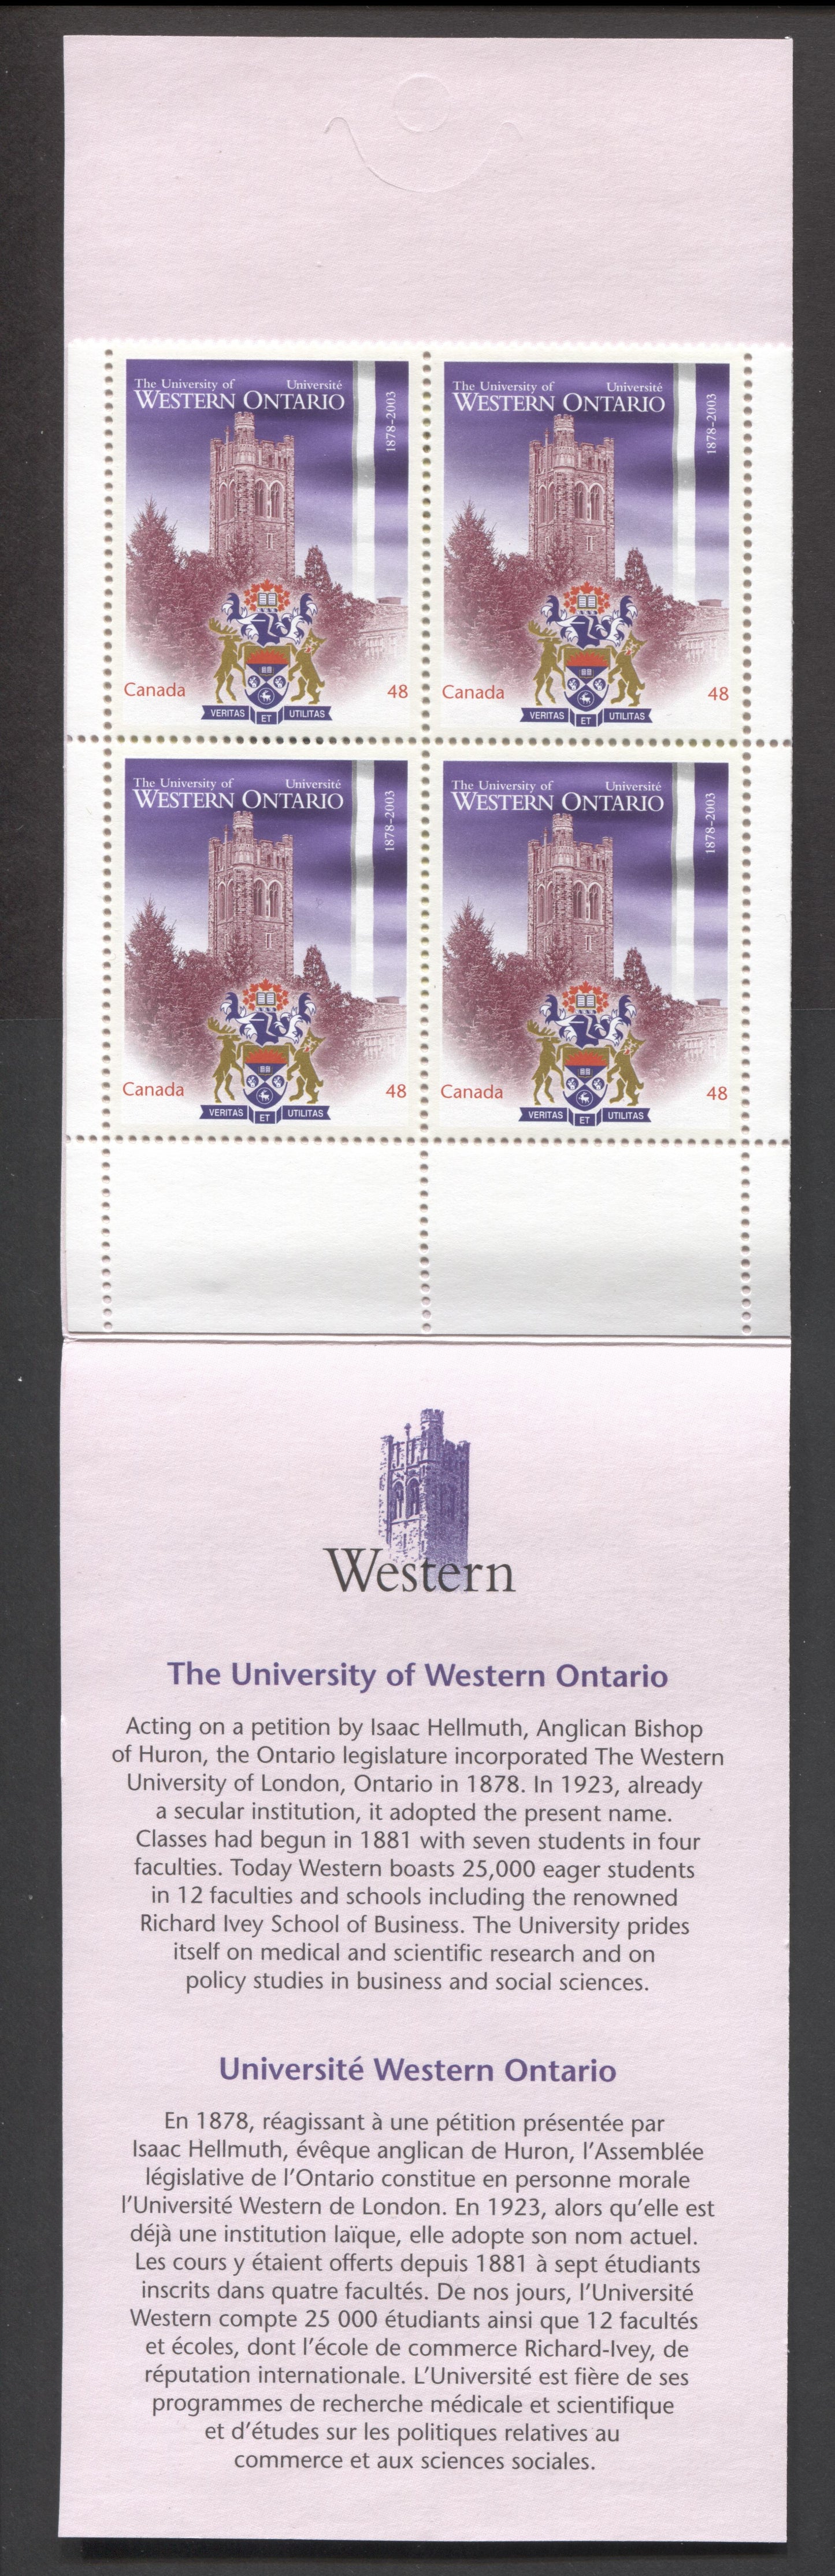 Canada #BK268a-b 2003 University of Western Ontario Issue, Complete $3.84 Booklet, Tullis Russell Coatings Paper, Dead Paper, 4 mm GT-4 Tagging